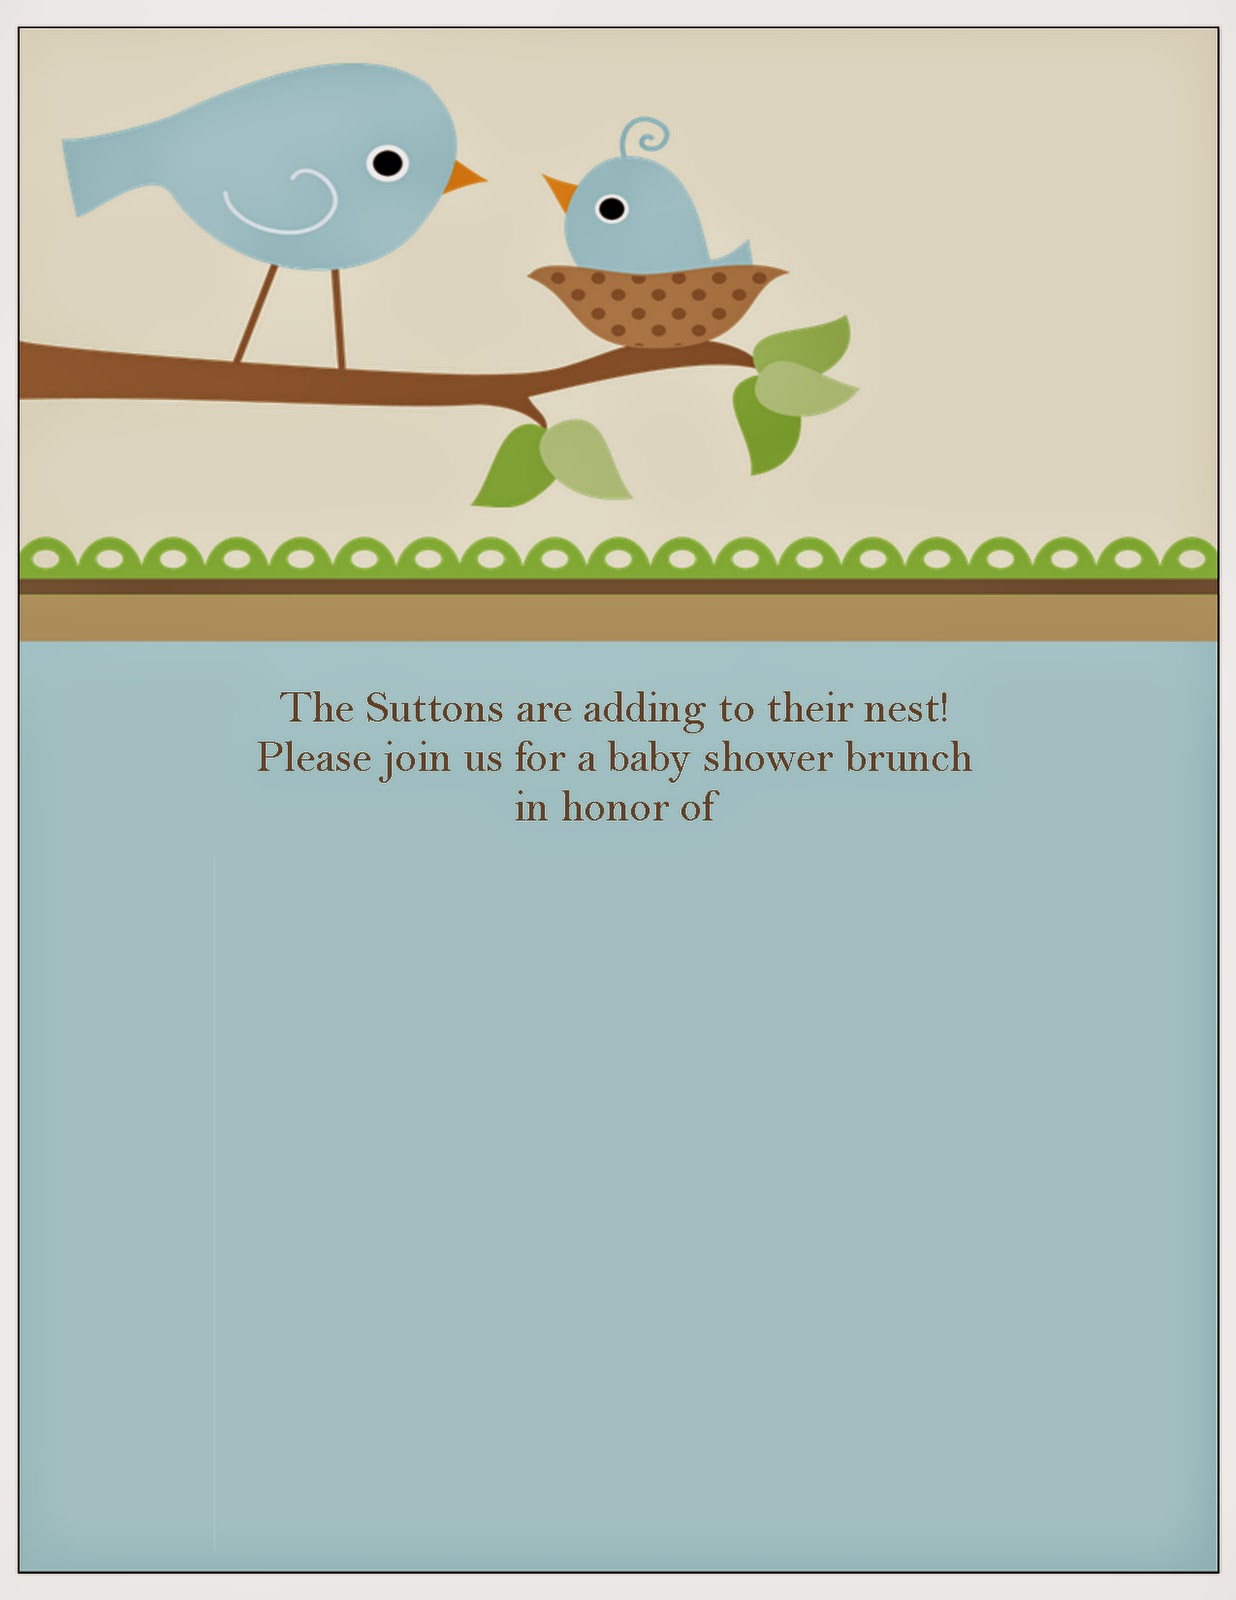 clipart for baby shower invitations free - photo #48